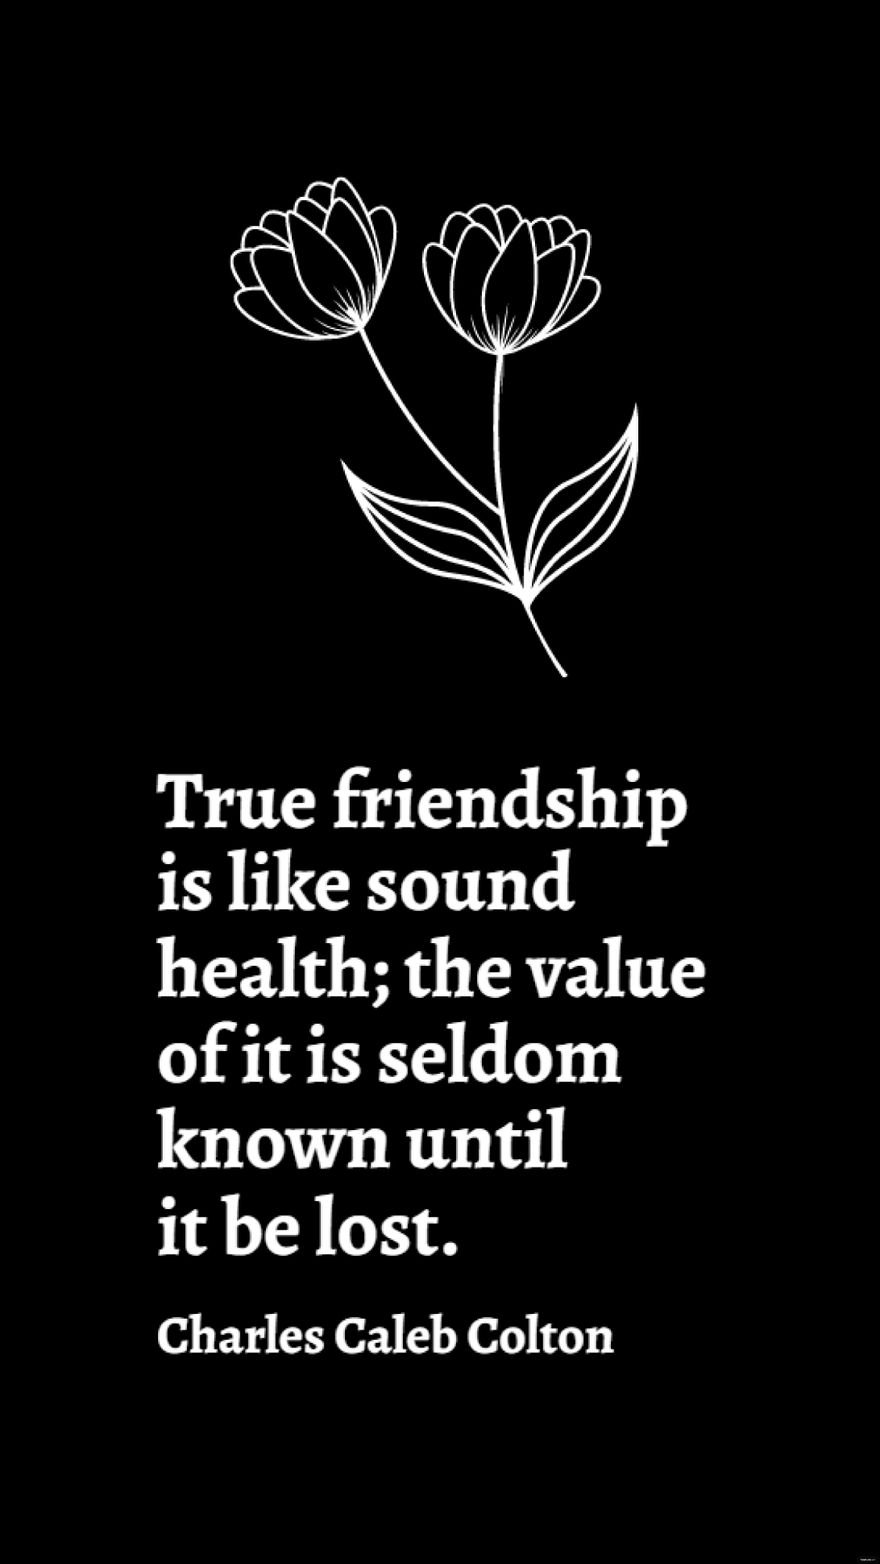 Charles Caleb Colton - True friendship is like sound health; the value of it is seldom known until it be lost.